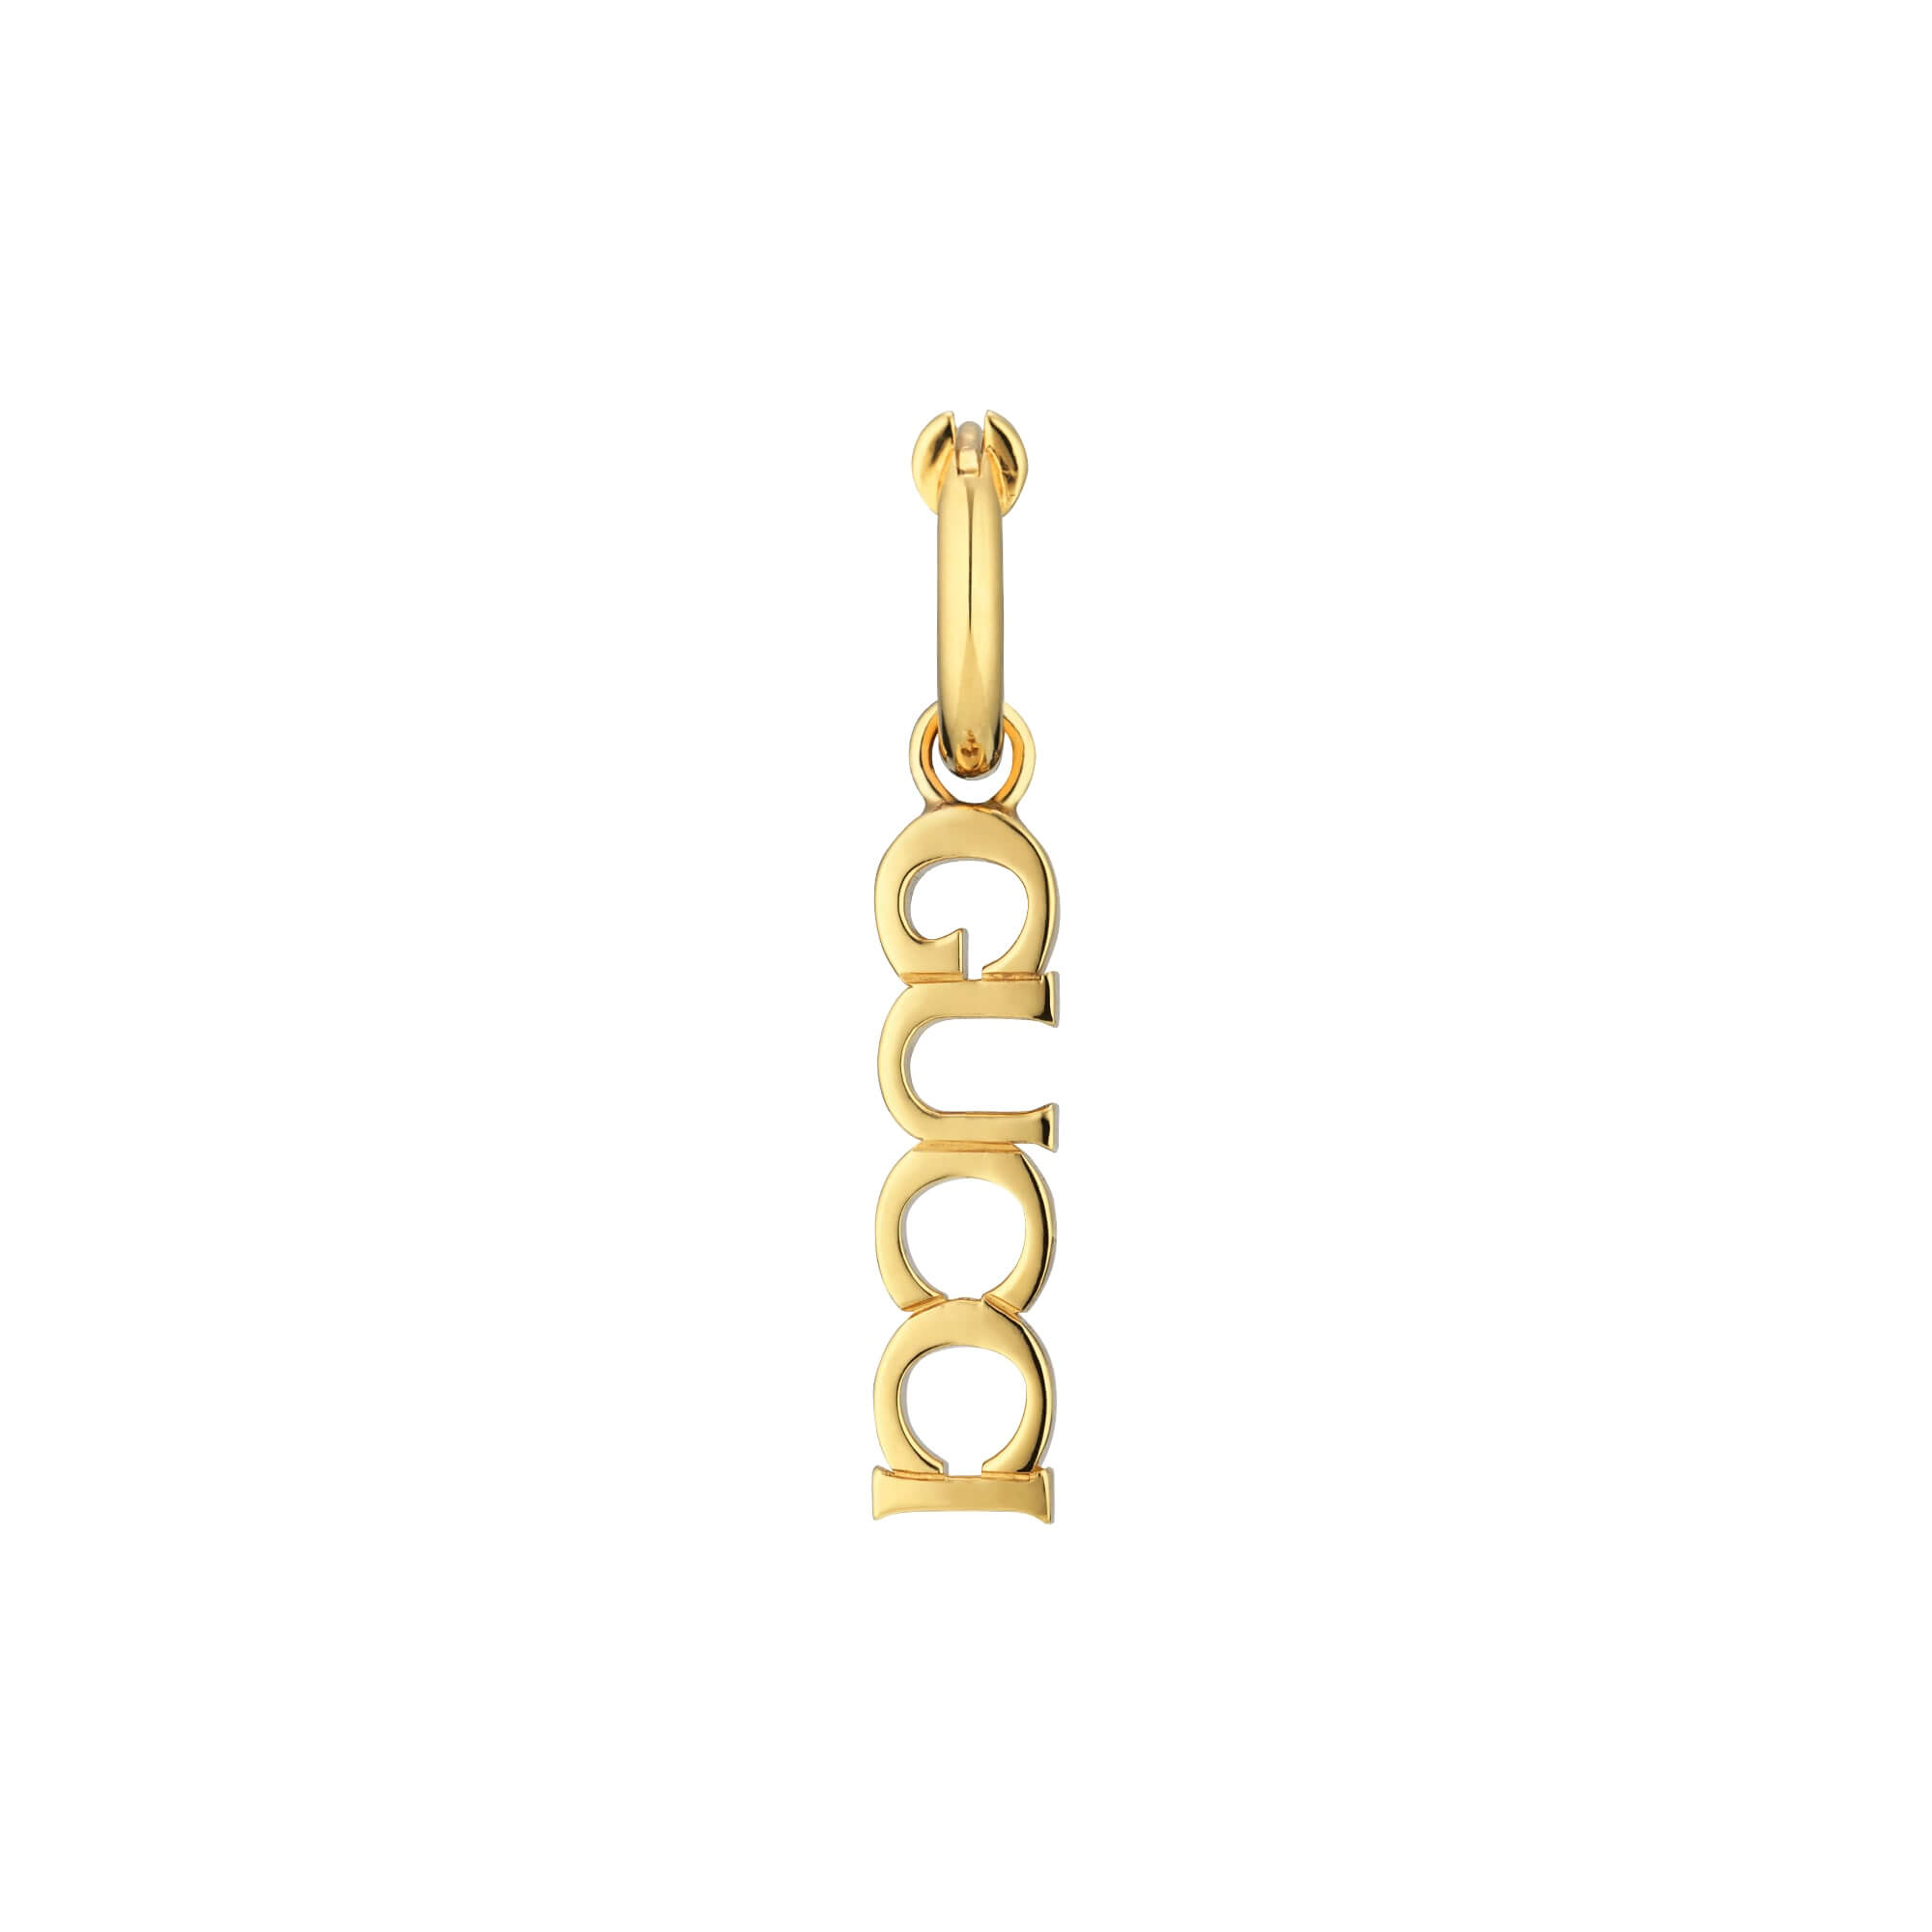 gucci-letter-single-earring-p-774601I46008005-a